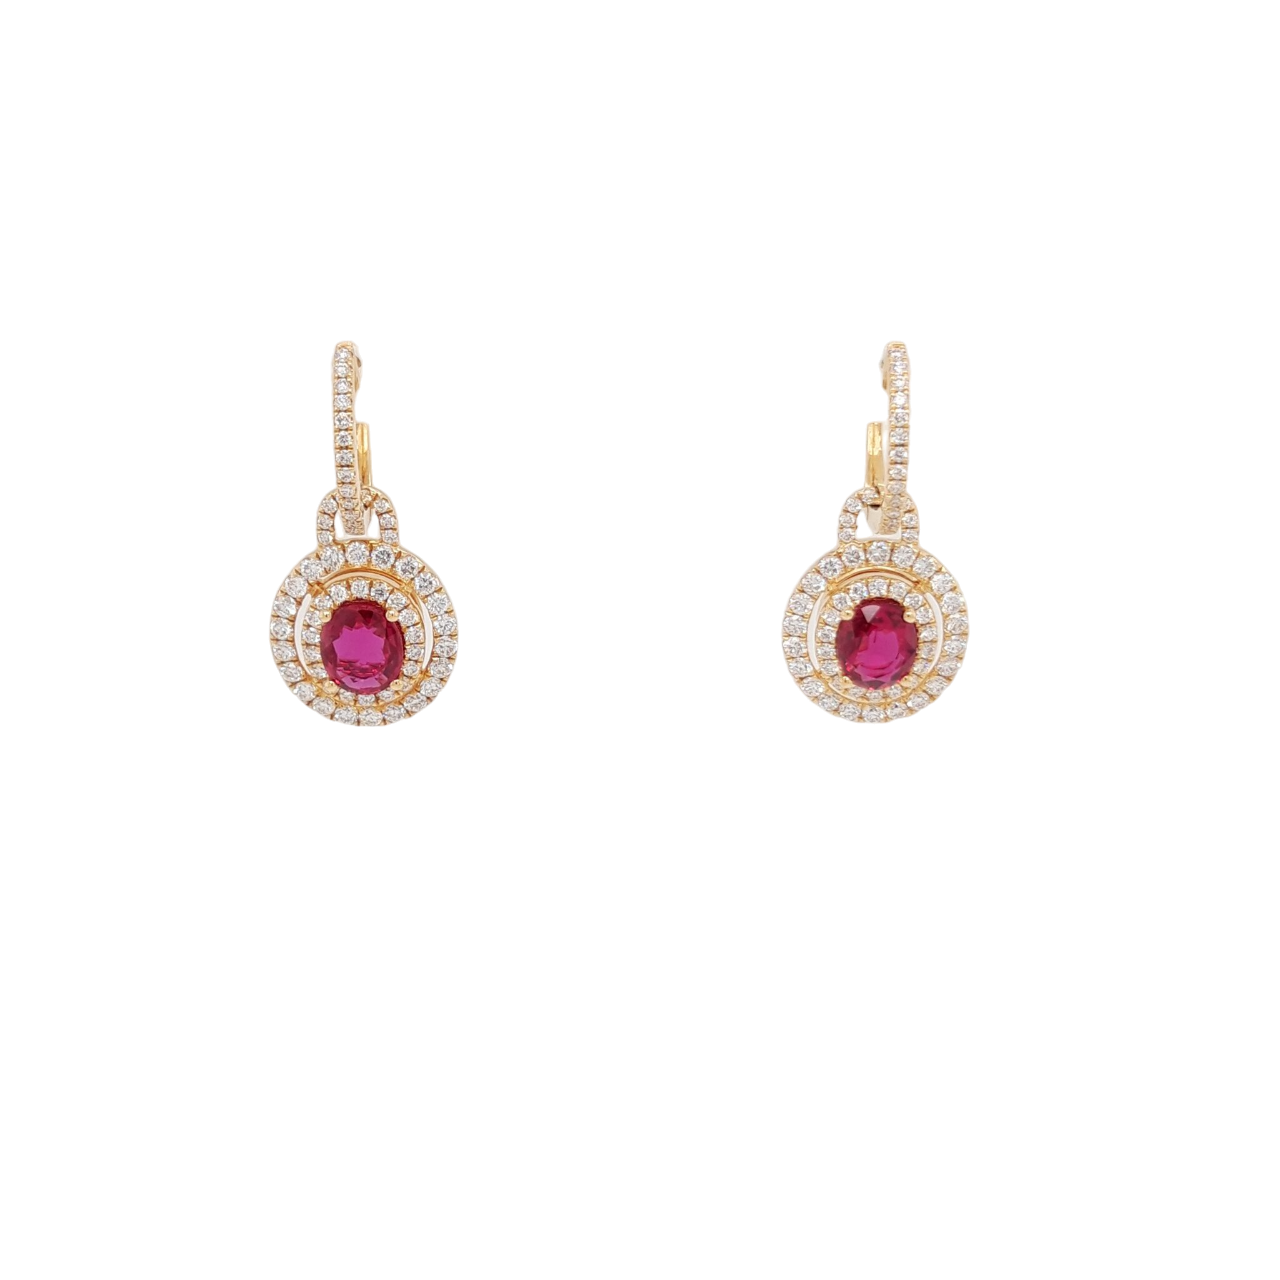 Ladies Diamond and Ruby Earrings 2.18 Carats